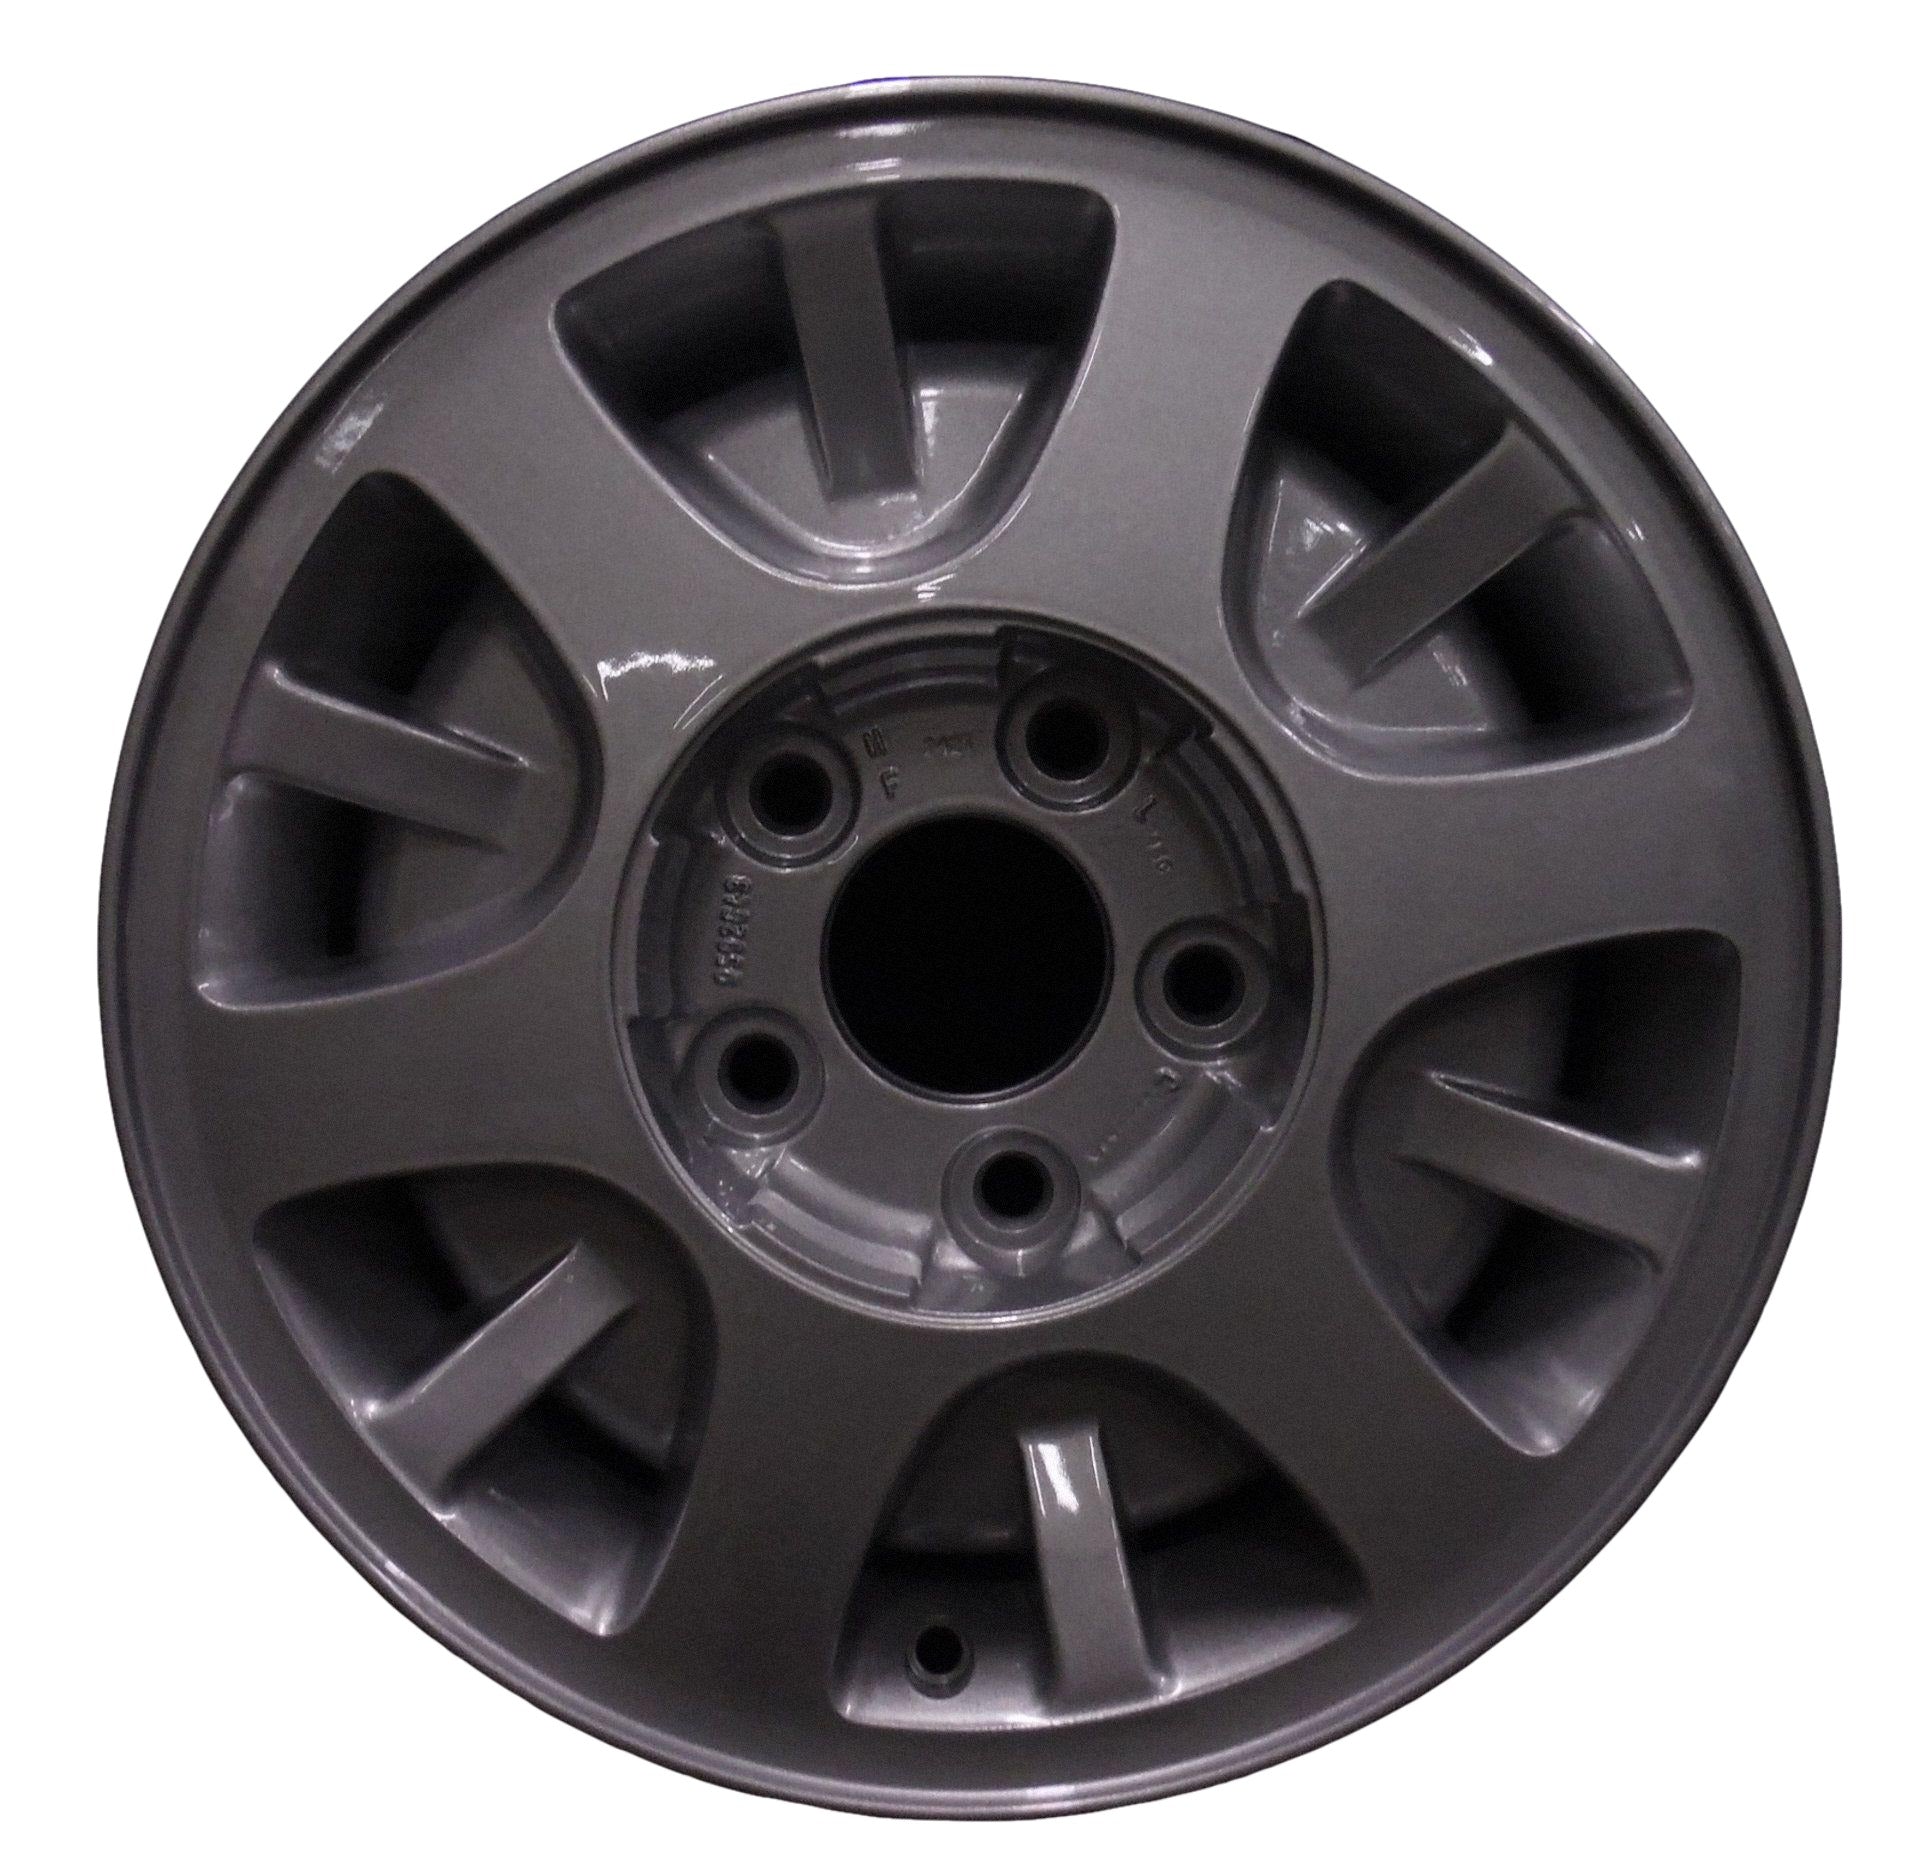 Chevrolet S10 Truck  1996, 1997 Factory OEM Car Wheel Size 15x7 Alloy WAO.5049.PS02.FF